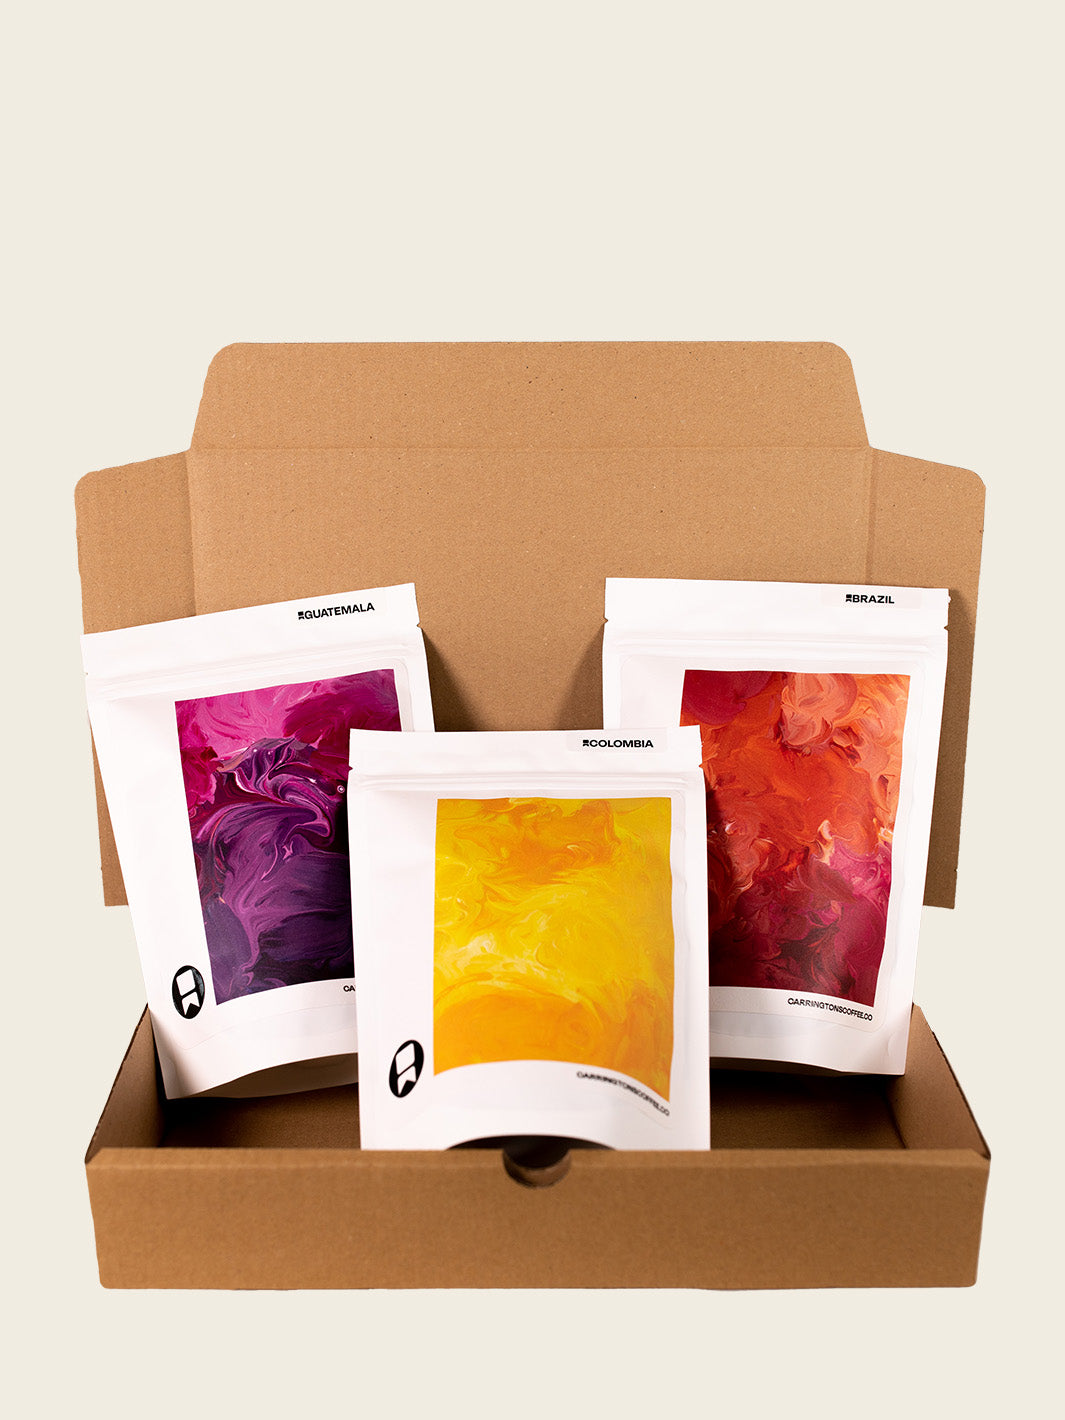 Roasted Coffee Subscription - Specialty Coffee